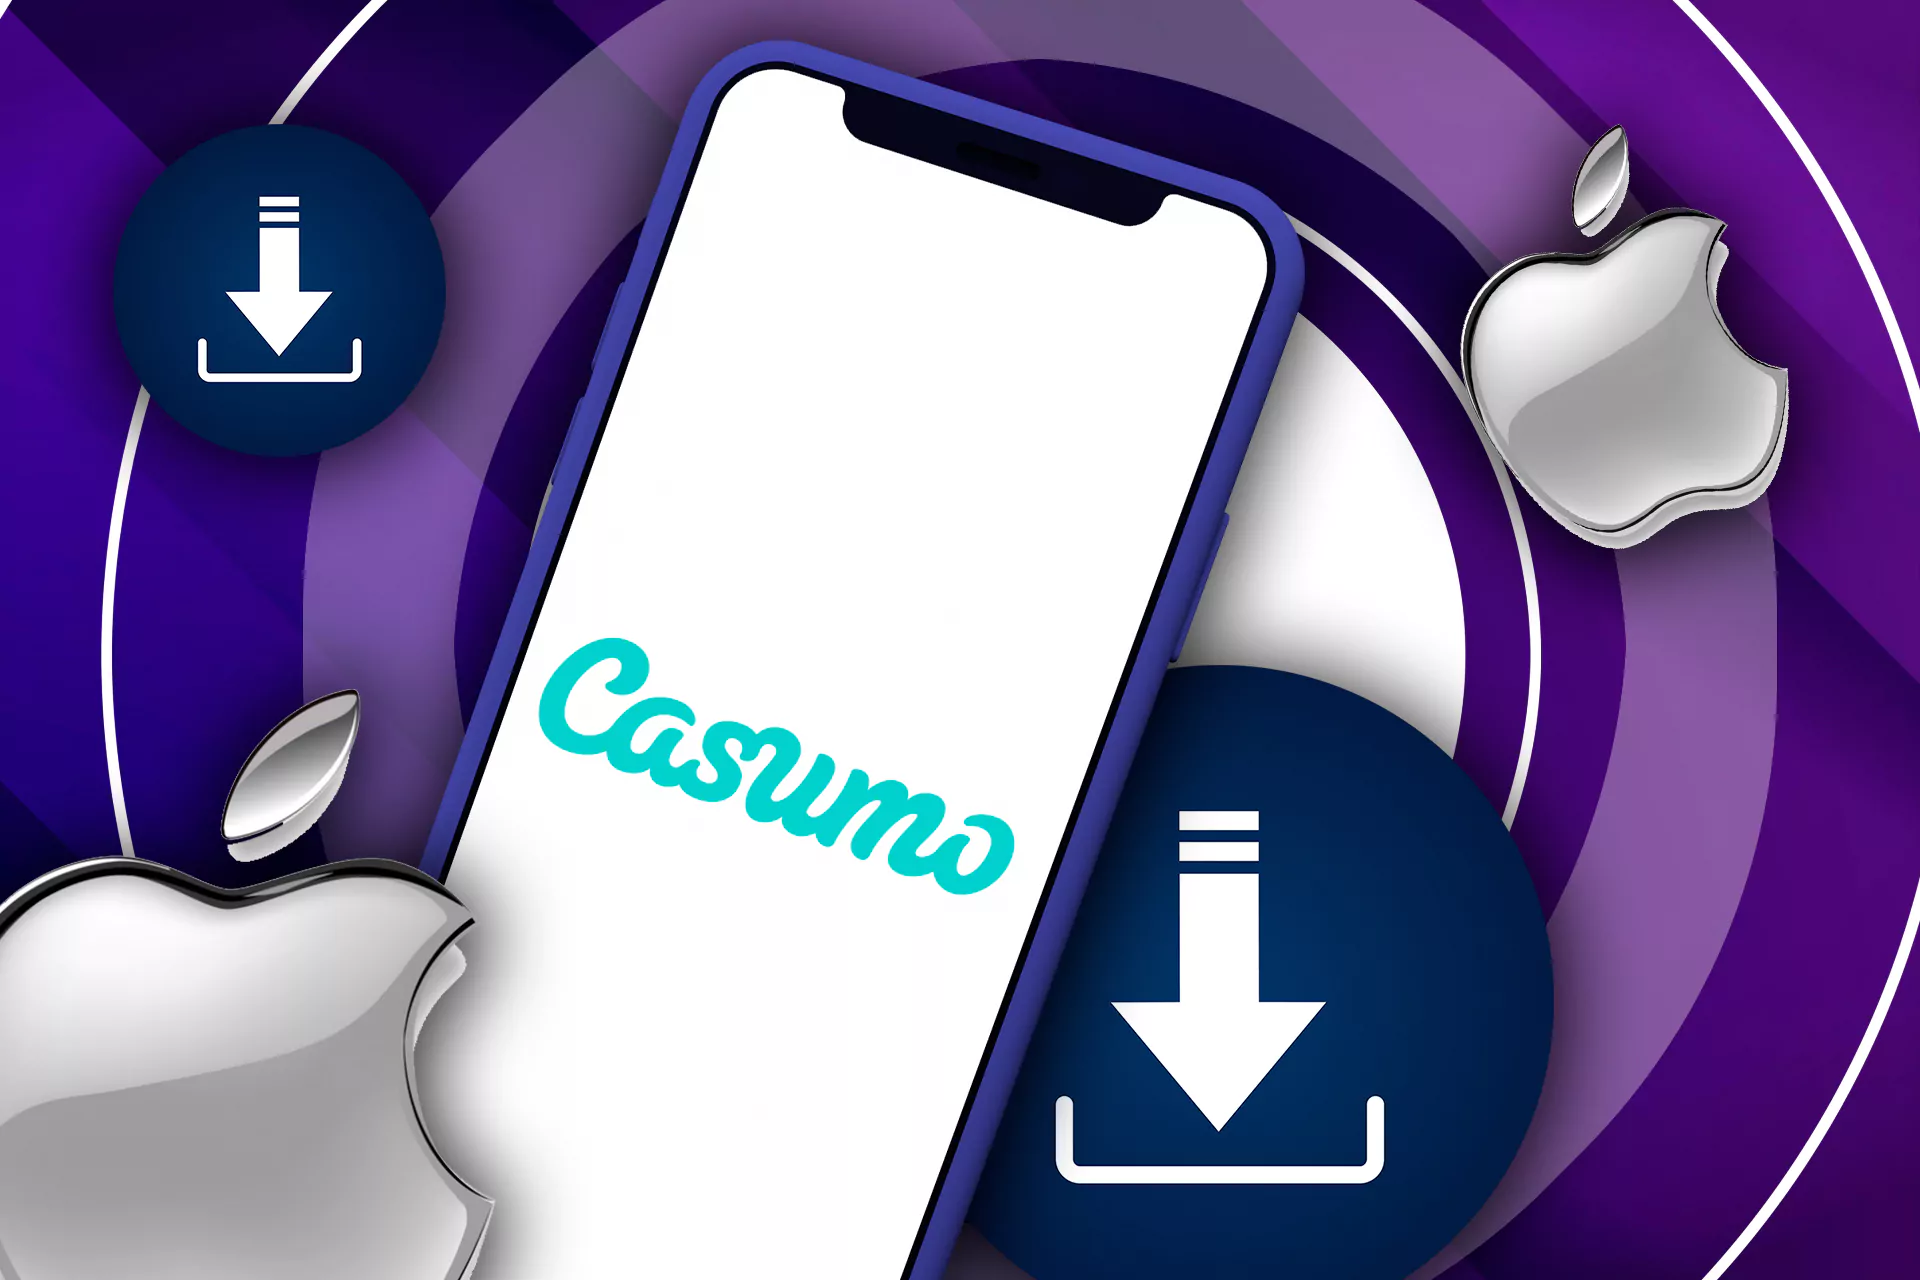 The Casumo app for iOS can be installed from the App Store.